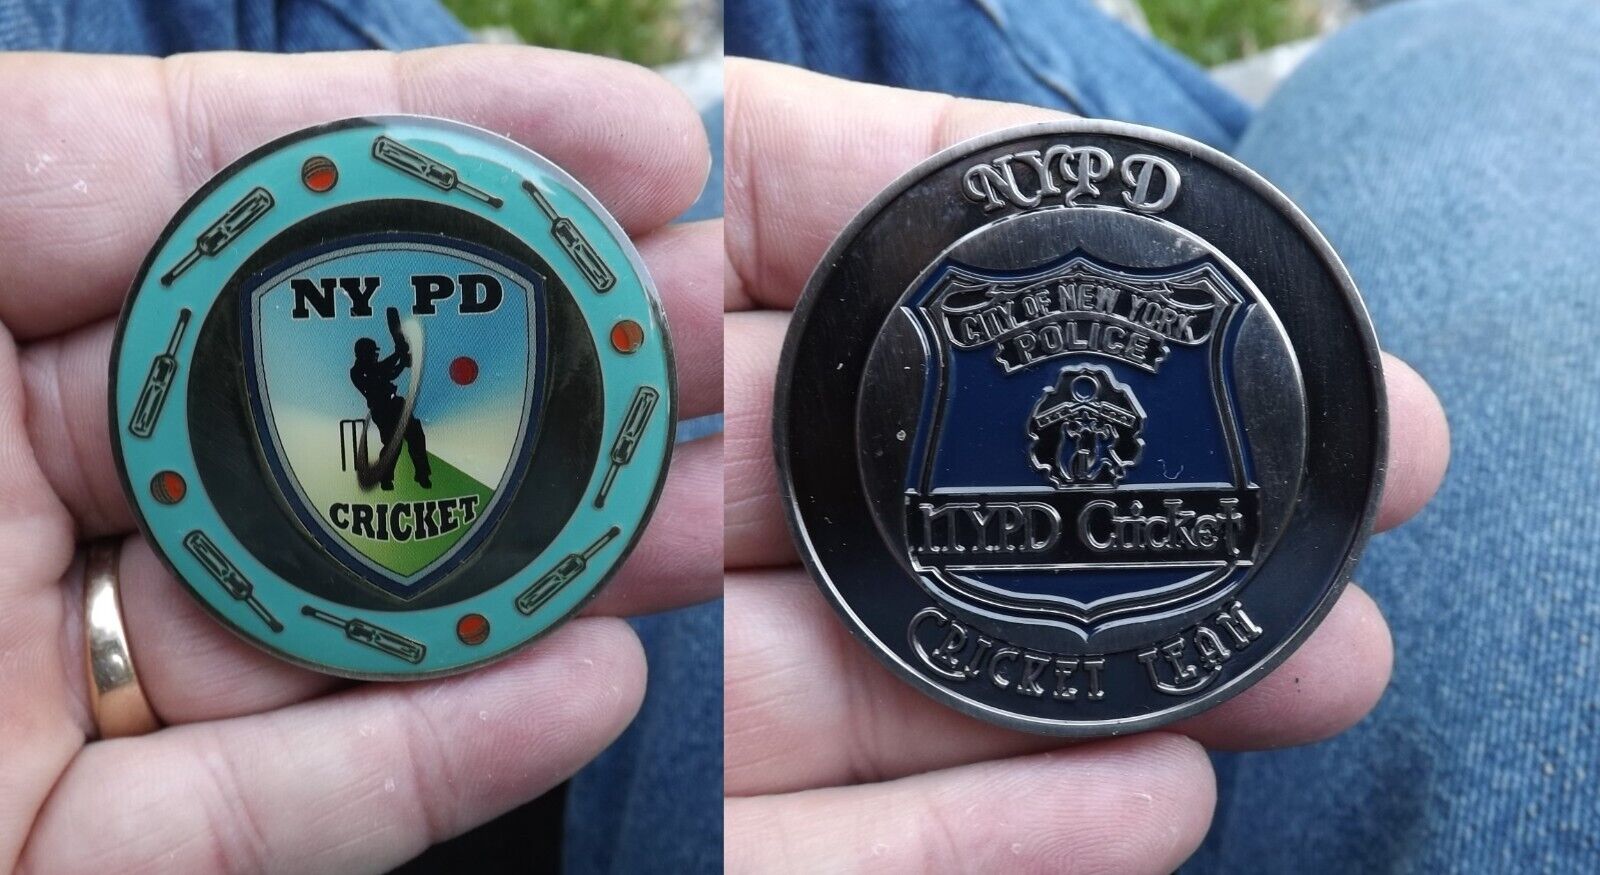 NYPD Cricket Team Police Department Challenge Coin